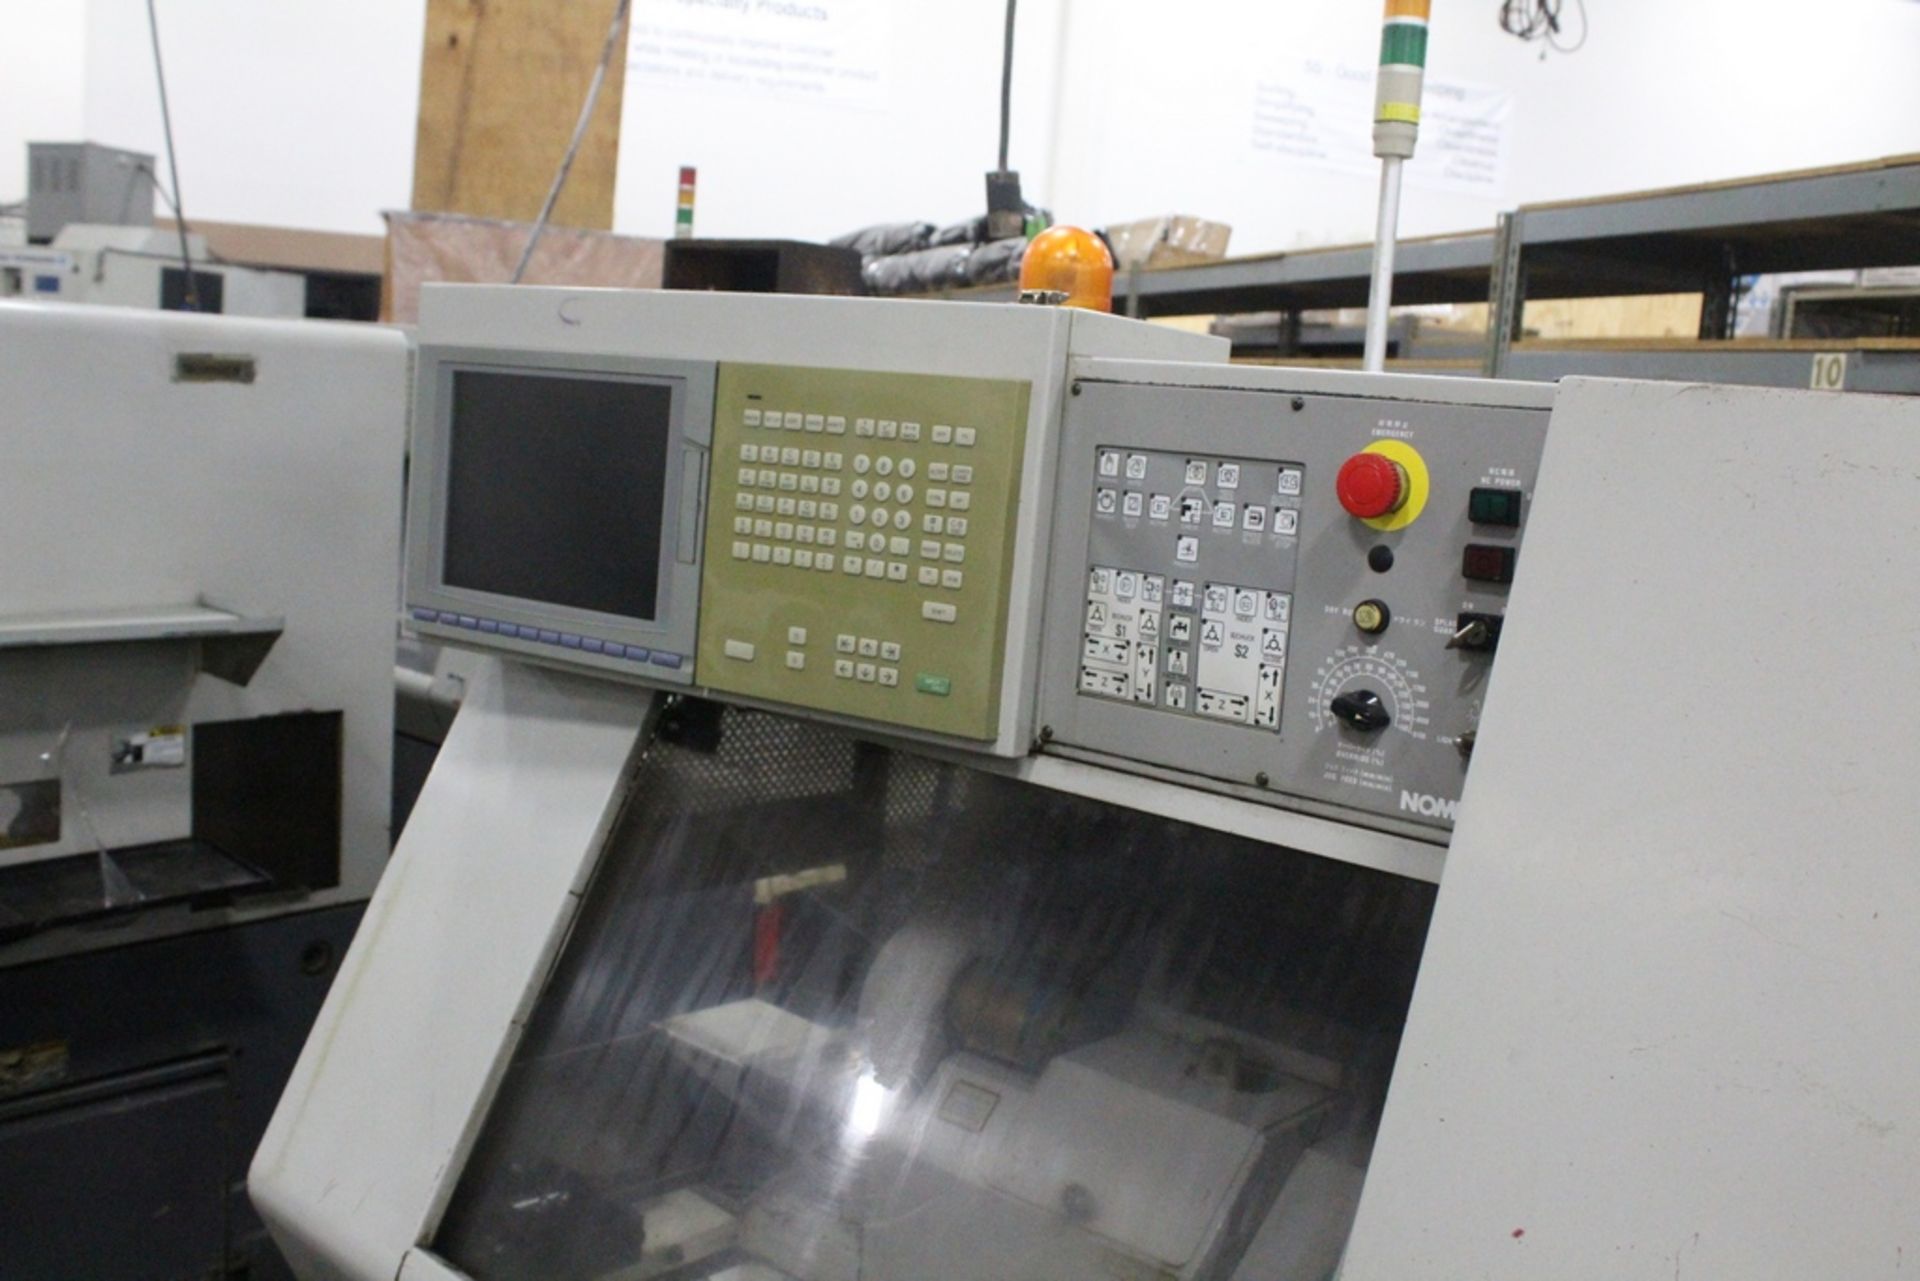 2003 NOMURA NN20B5 CNC SWISS LATHE, SUB SPINDLE, LIVE TOOLING, SN: 25080301, 20-MM, 6-AXIS, 200-MM - Image 2 of 2